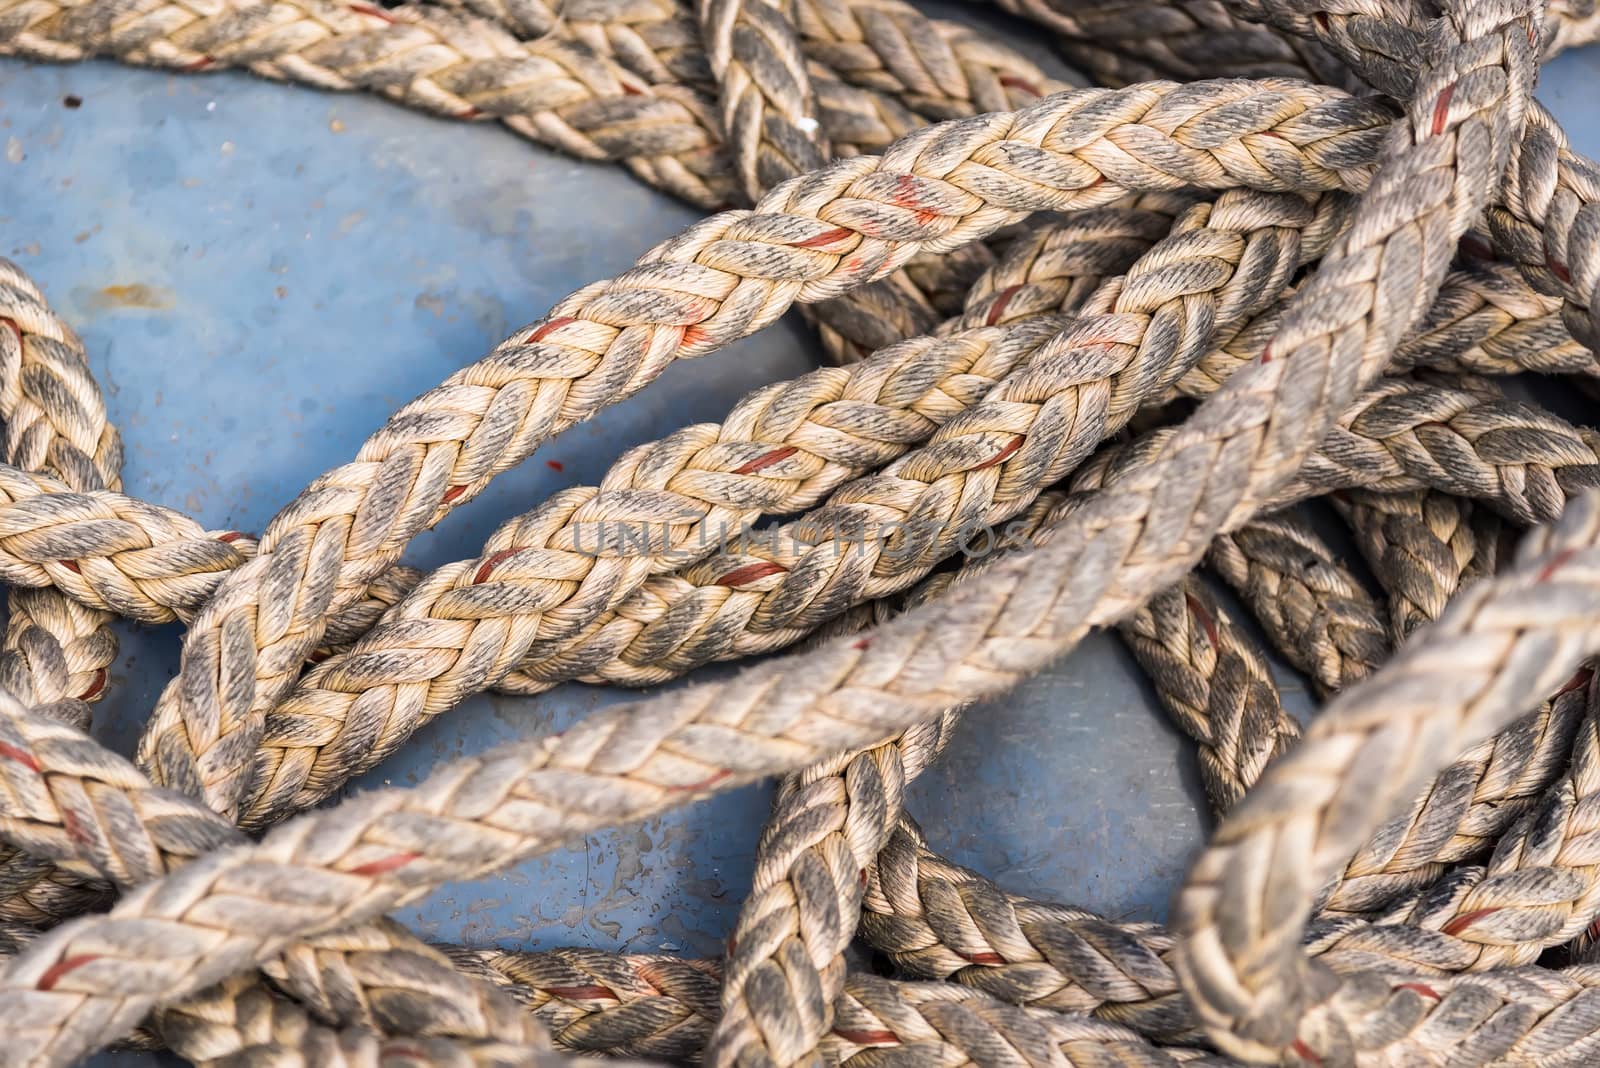 Background texture of coiled marine or nautical rope by Bubbers